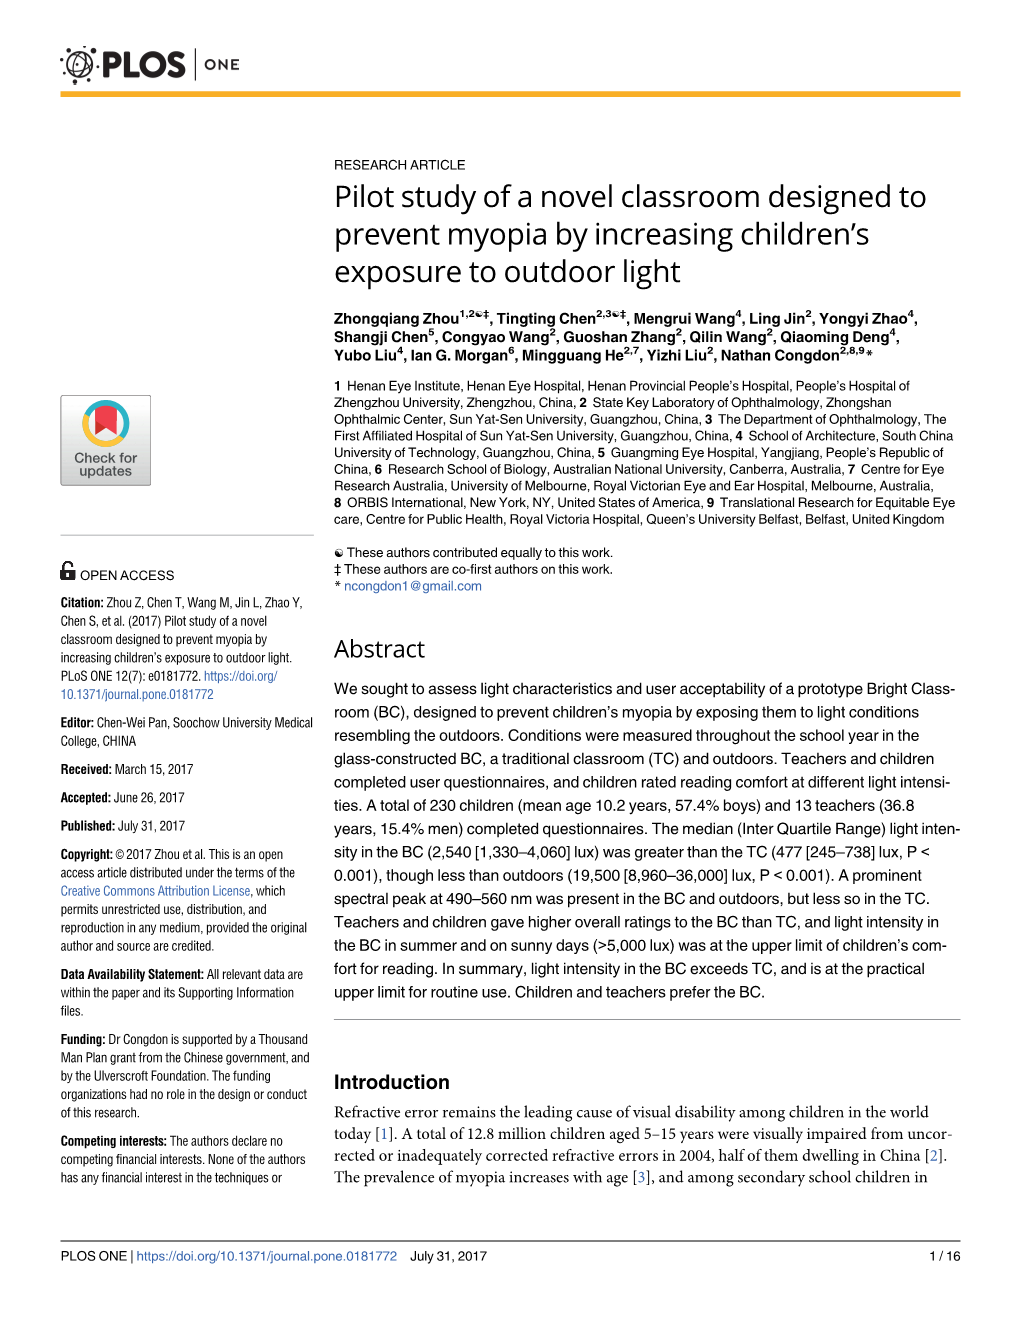 Pilot Study of a Novel Classroom Designed to Prevent Myopia by Increasing Children’S Exposure to Outdoor Light